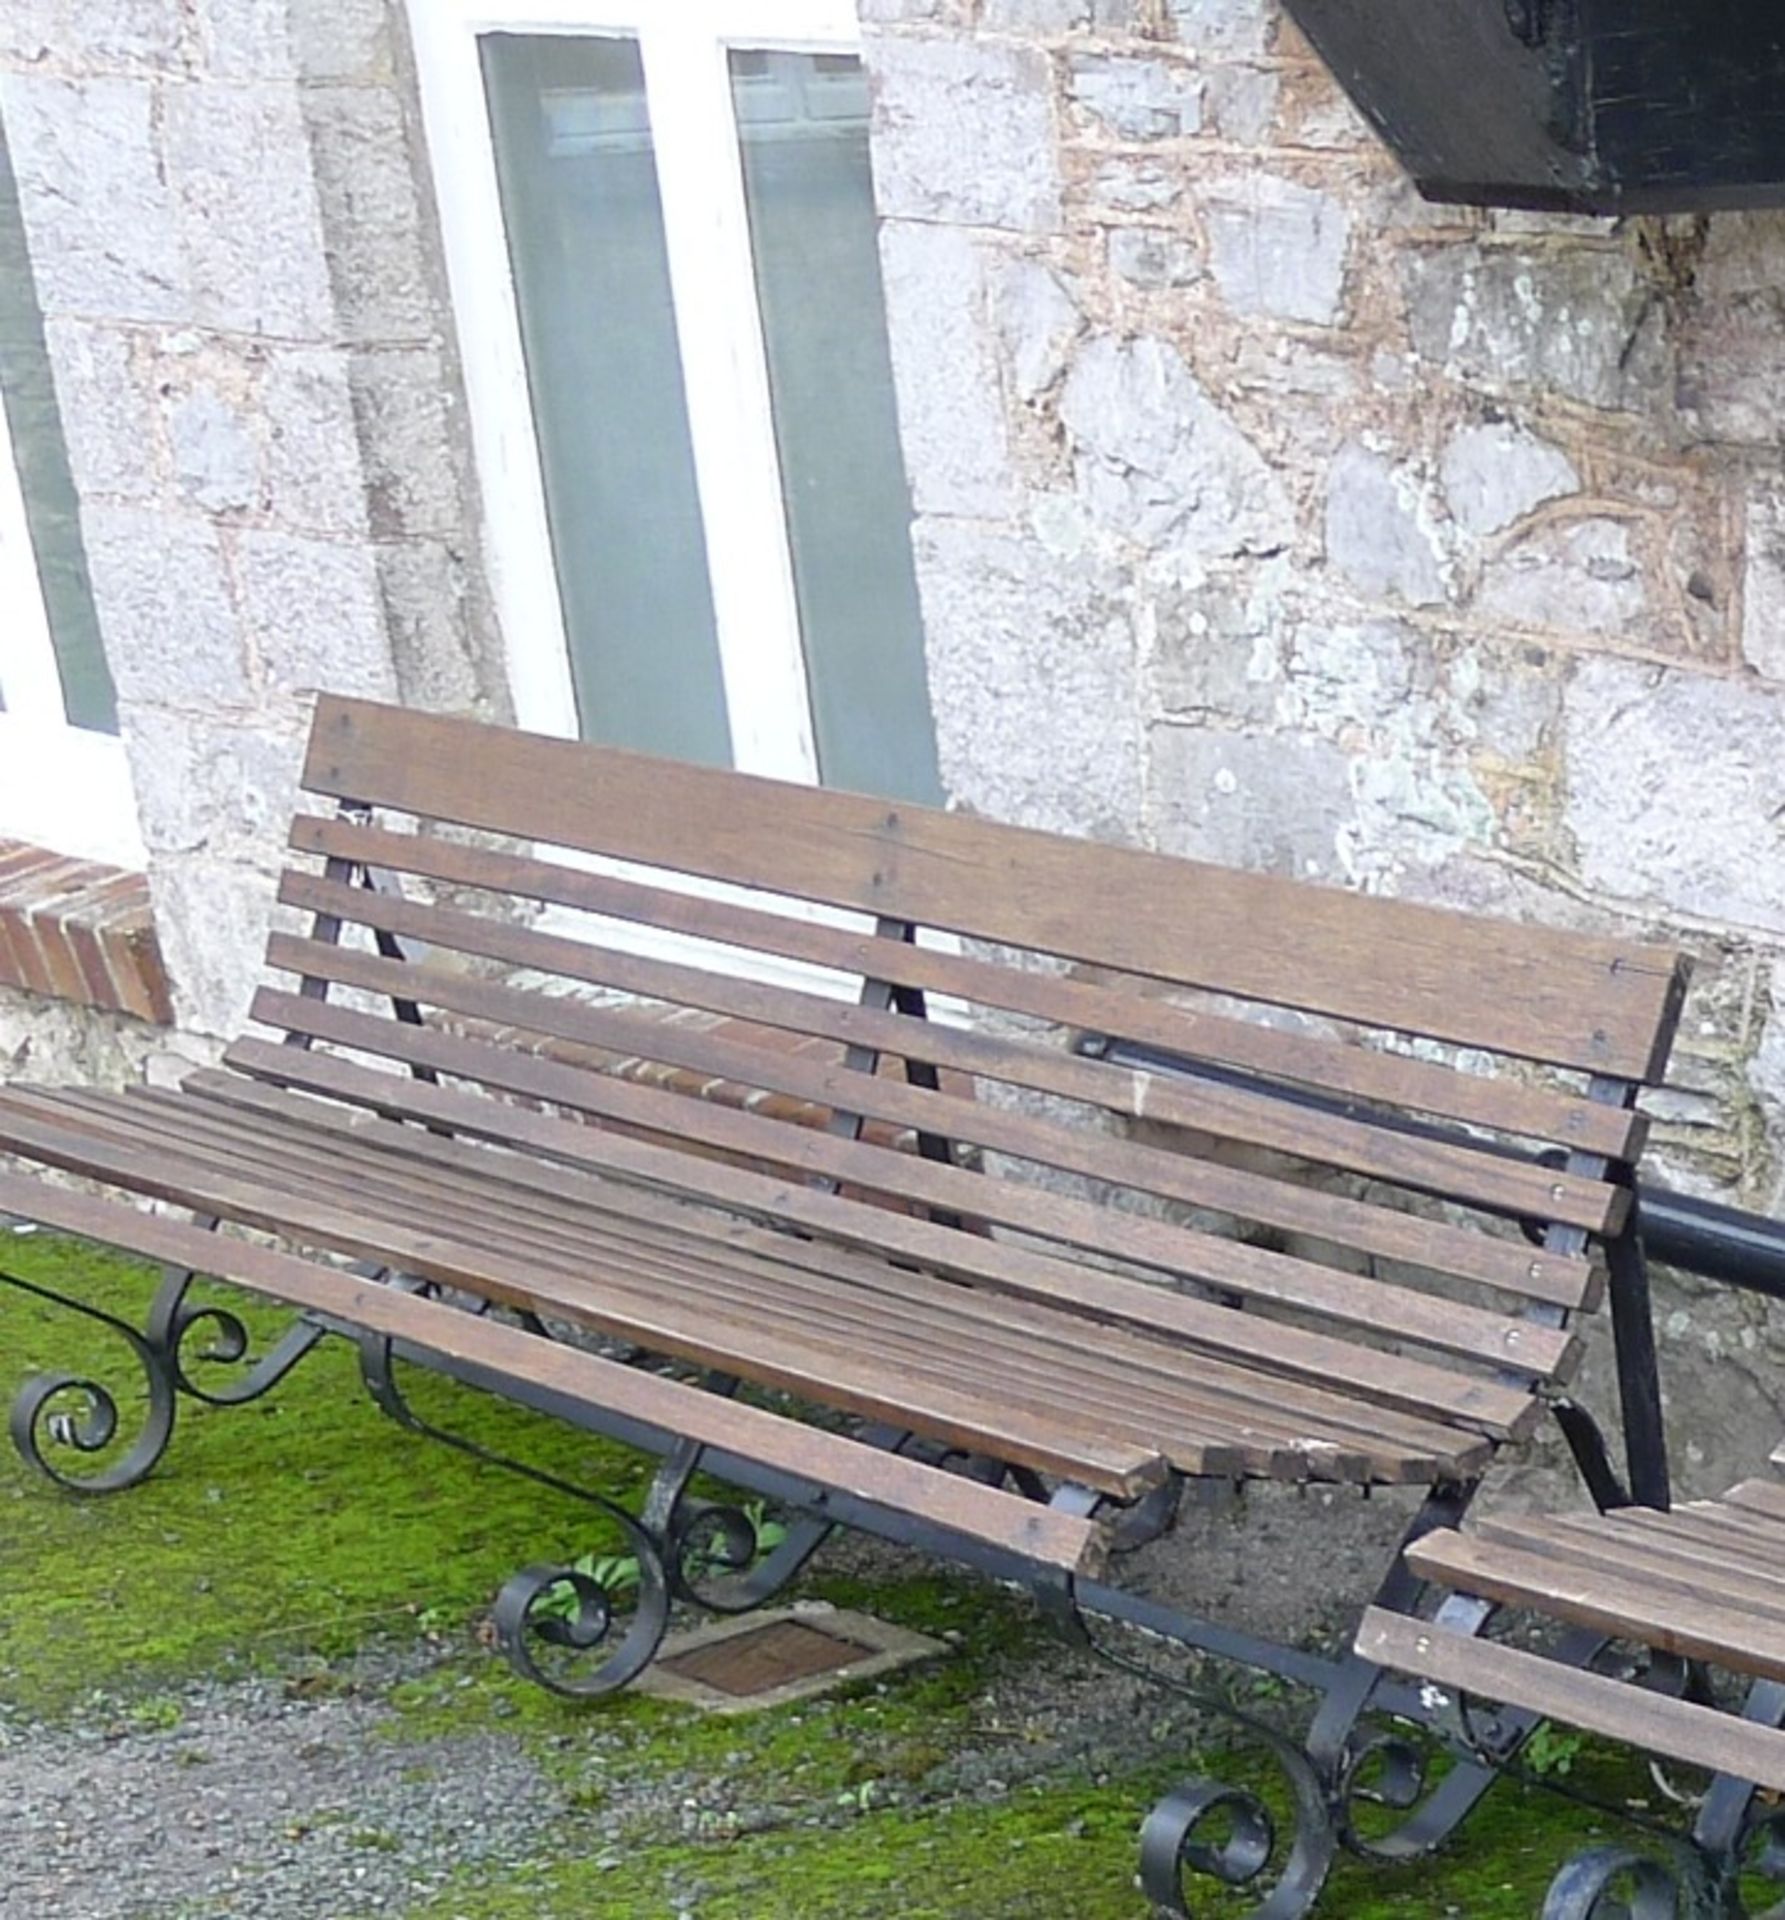 1 four seater timber garden bench (located outside junior school)